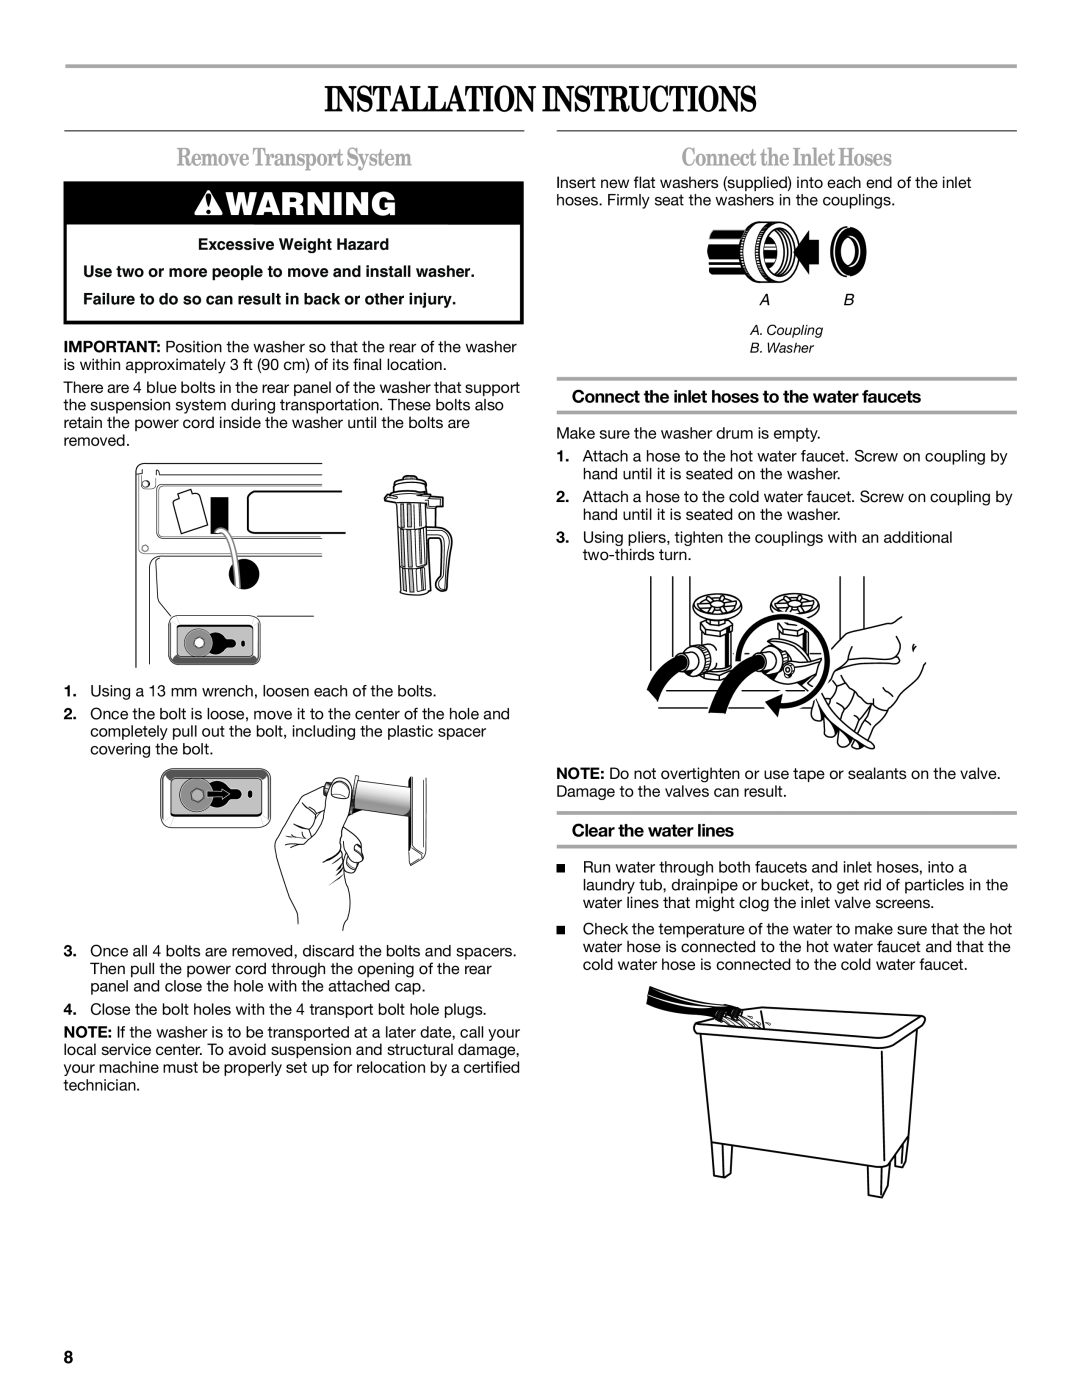 Whirlpool W10117768A manual Installation Instructions, RemoveTransportSystem, ConnecttheInletHoses, Clear the water lines 